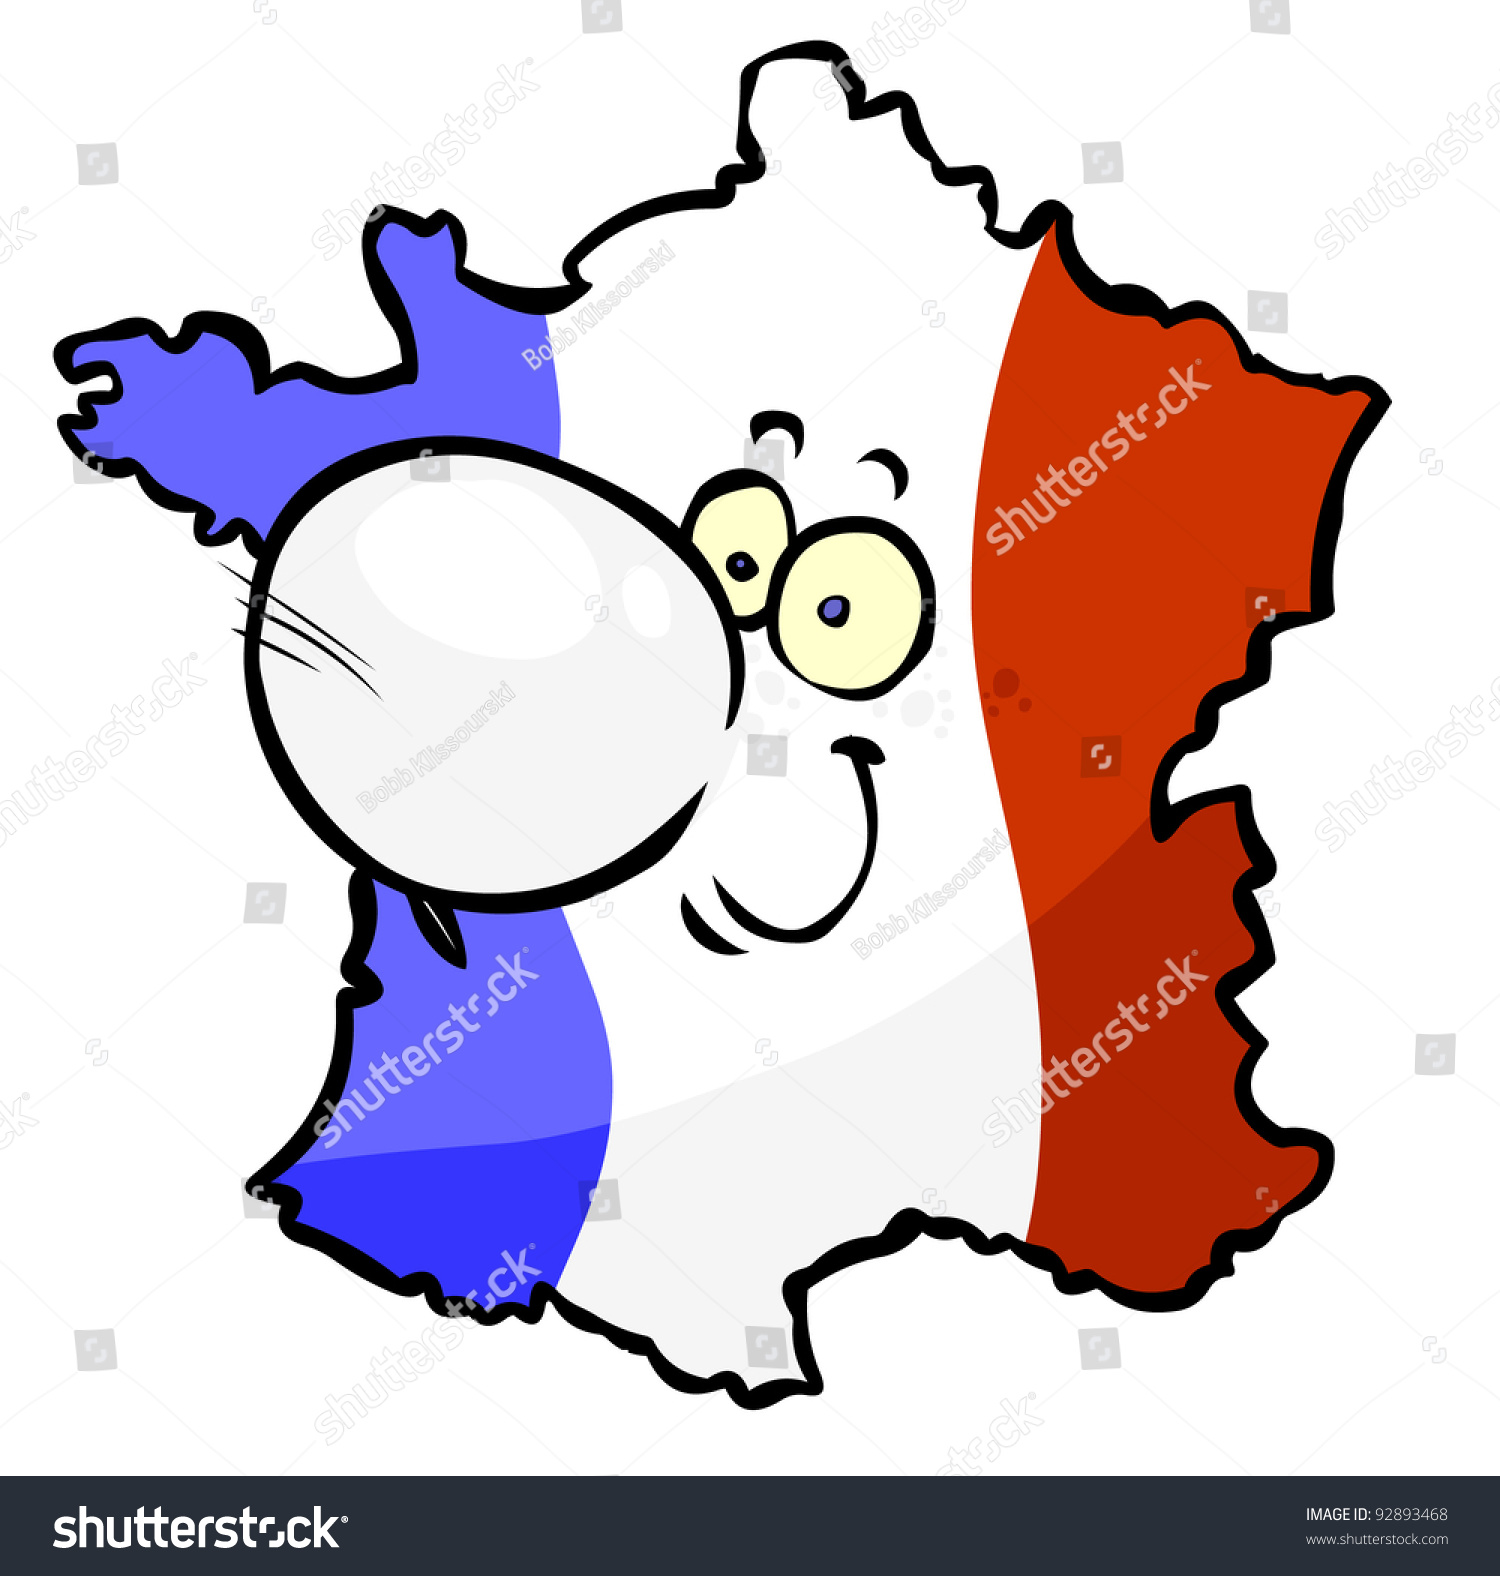 clipart france map - photo #38